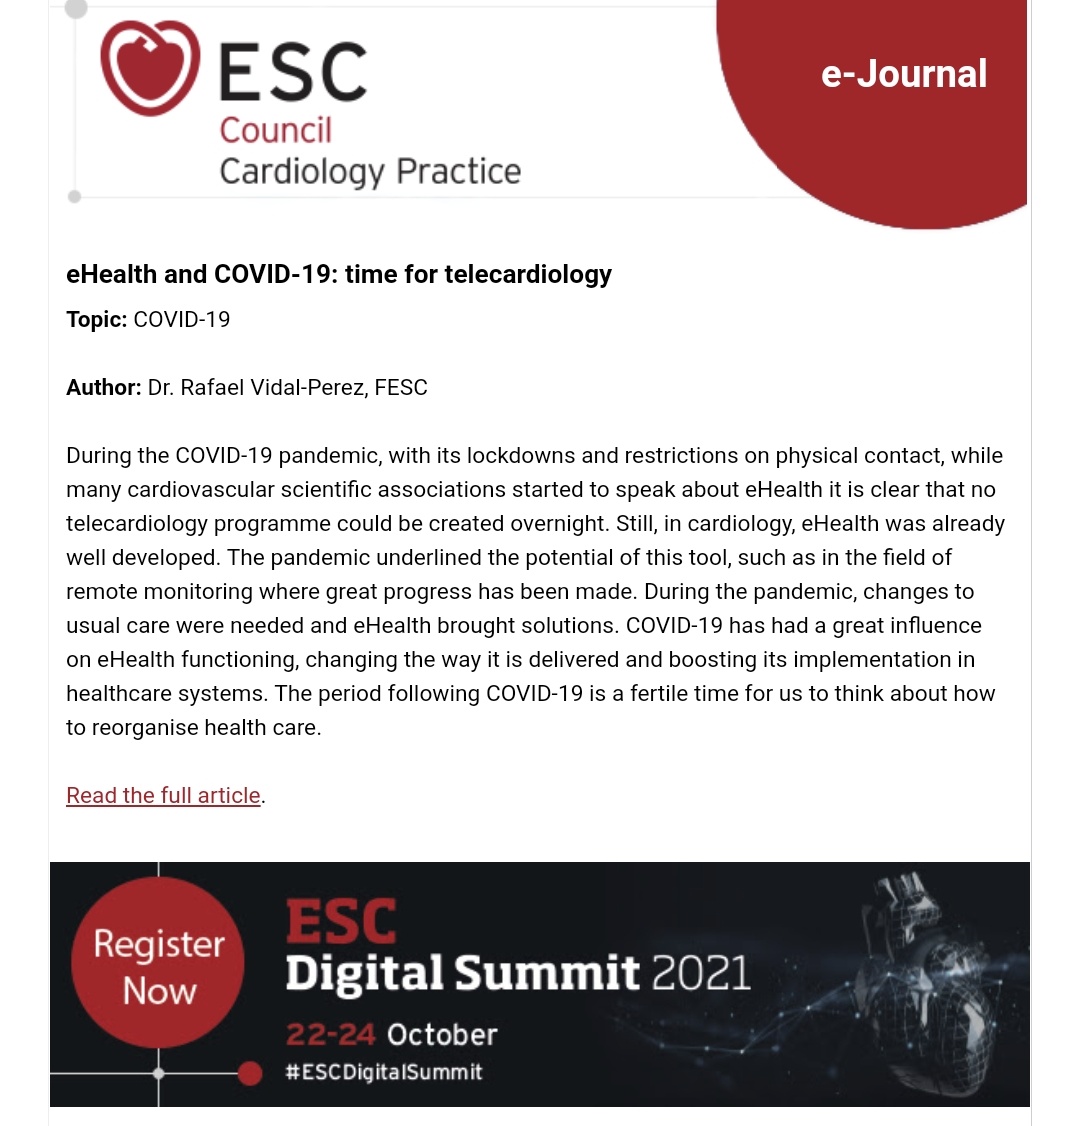 More information about #telecardiology after #COVID19 during #ESCDigitalsummit @escardio in the meanwhile you could read this small summary escardio.org/Journals/E-Jou… Proud to be author